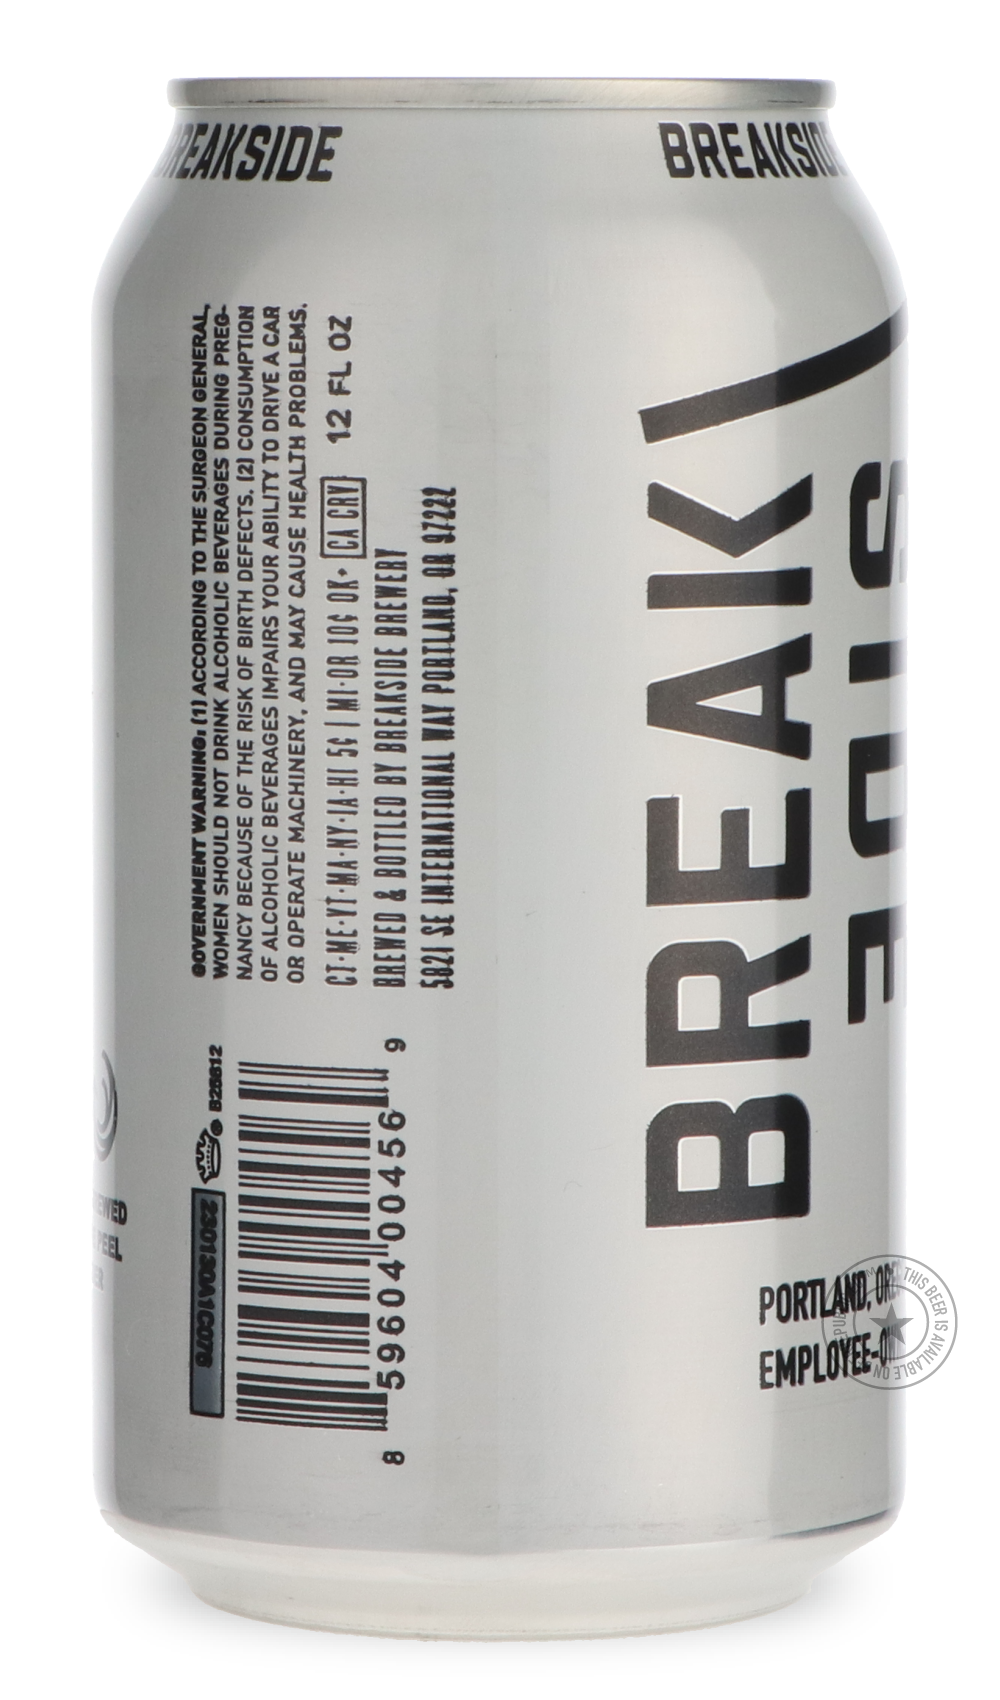 -Breakside- Breakside White-Pale- Only @ Beer Republic - The best online beer store for American & Canadian craft beer - Buy beer online from the USA and Canada - Bier online kopen - Amerikaans bier kopen - Craft beer store - Craft beer kopen - Amerikanisch bier kaufen - Bier online kaufen - Acheter biere online - IPA - Stout - Porter - New England IPA - Hazy IPA - Imperial Stout - Barrel Aged - Barrel Aged Imperial Stout - Brown - Dark beer - Blond - Blonde - Pilsner - Lager - Wheat - Weizen - Amber - Barl